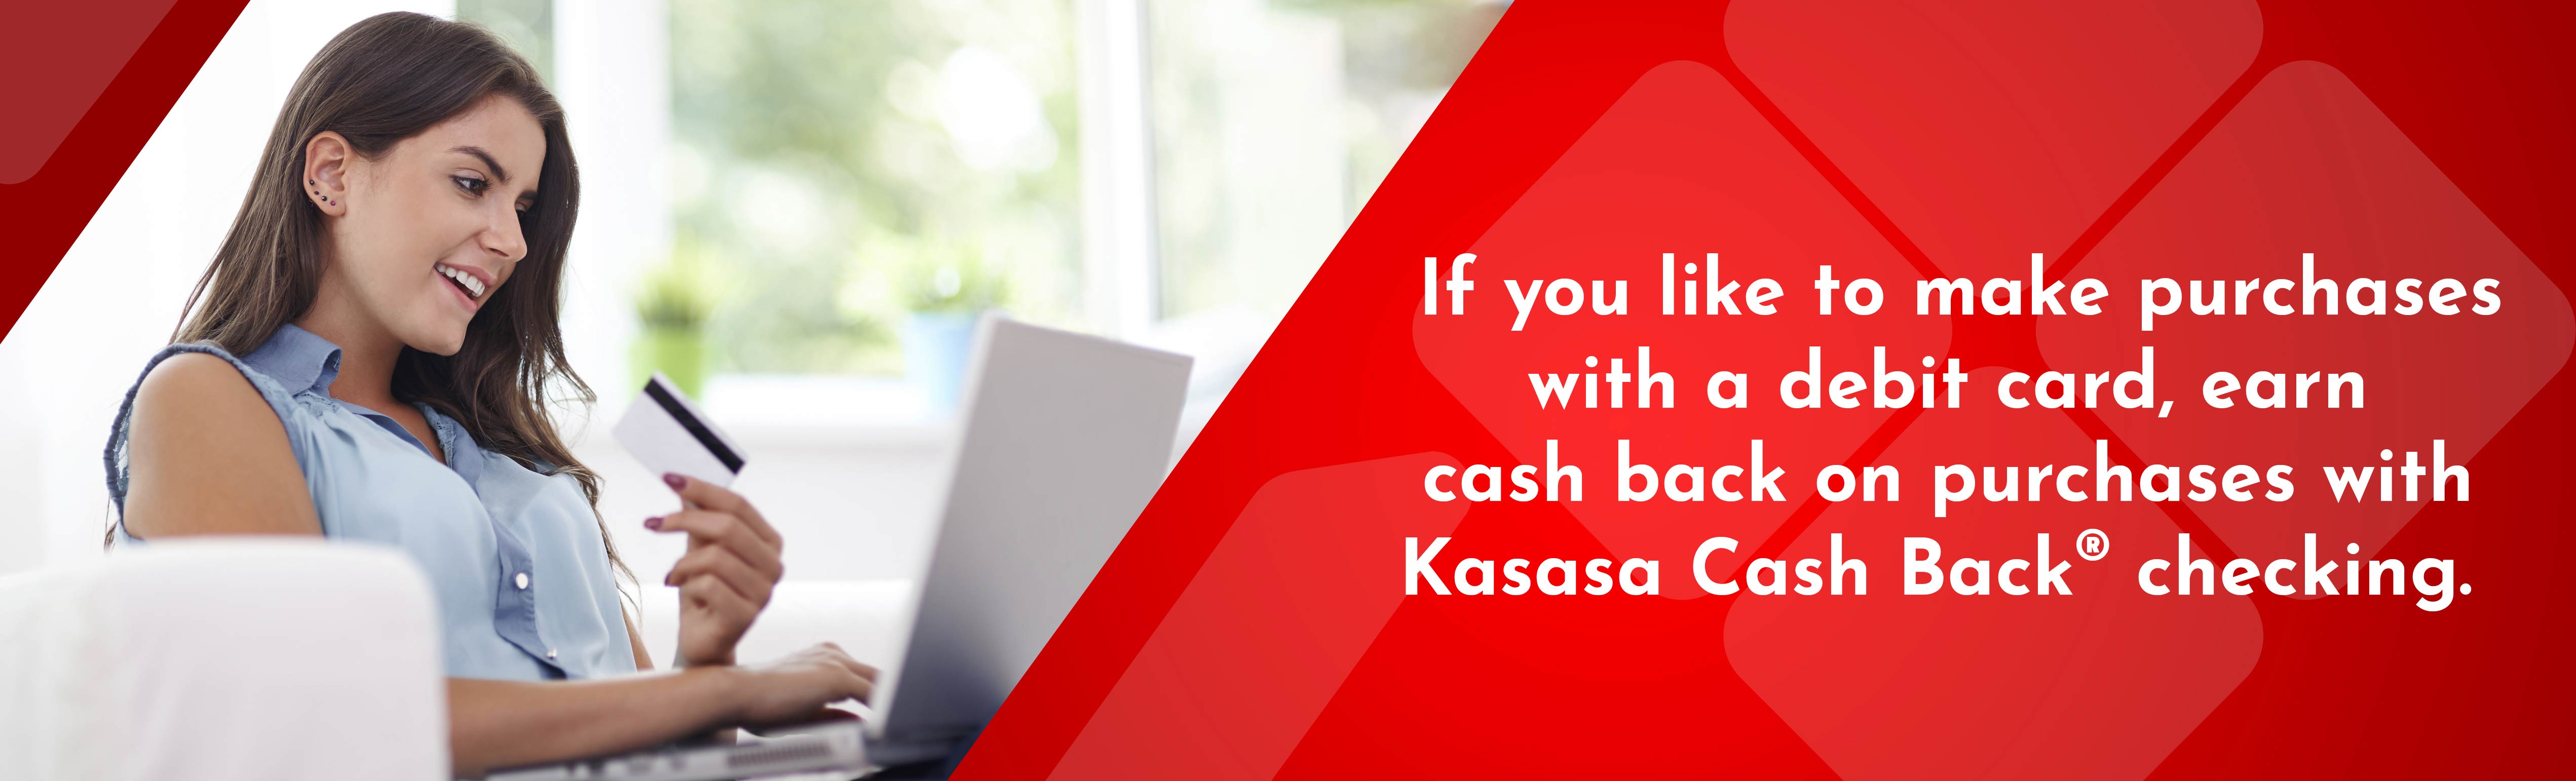 If you like to make purchases with a debit card, earn cash back on purchases with Kasasa Cash Back checking